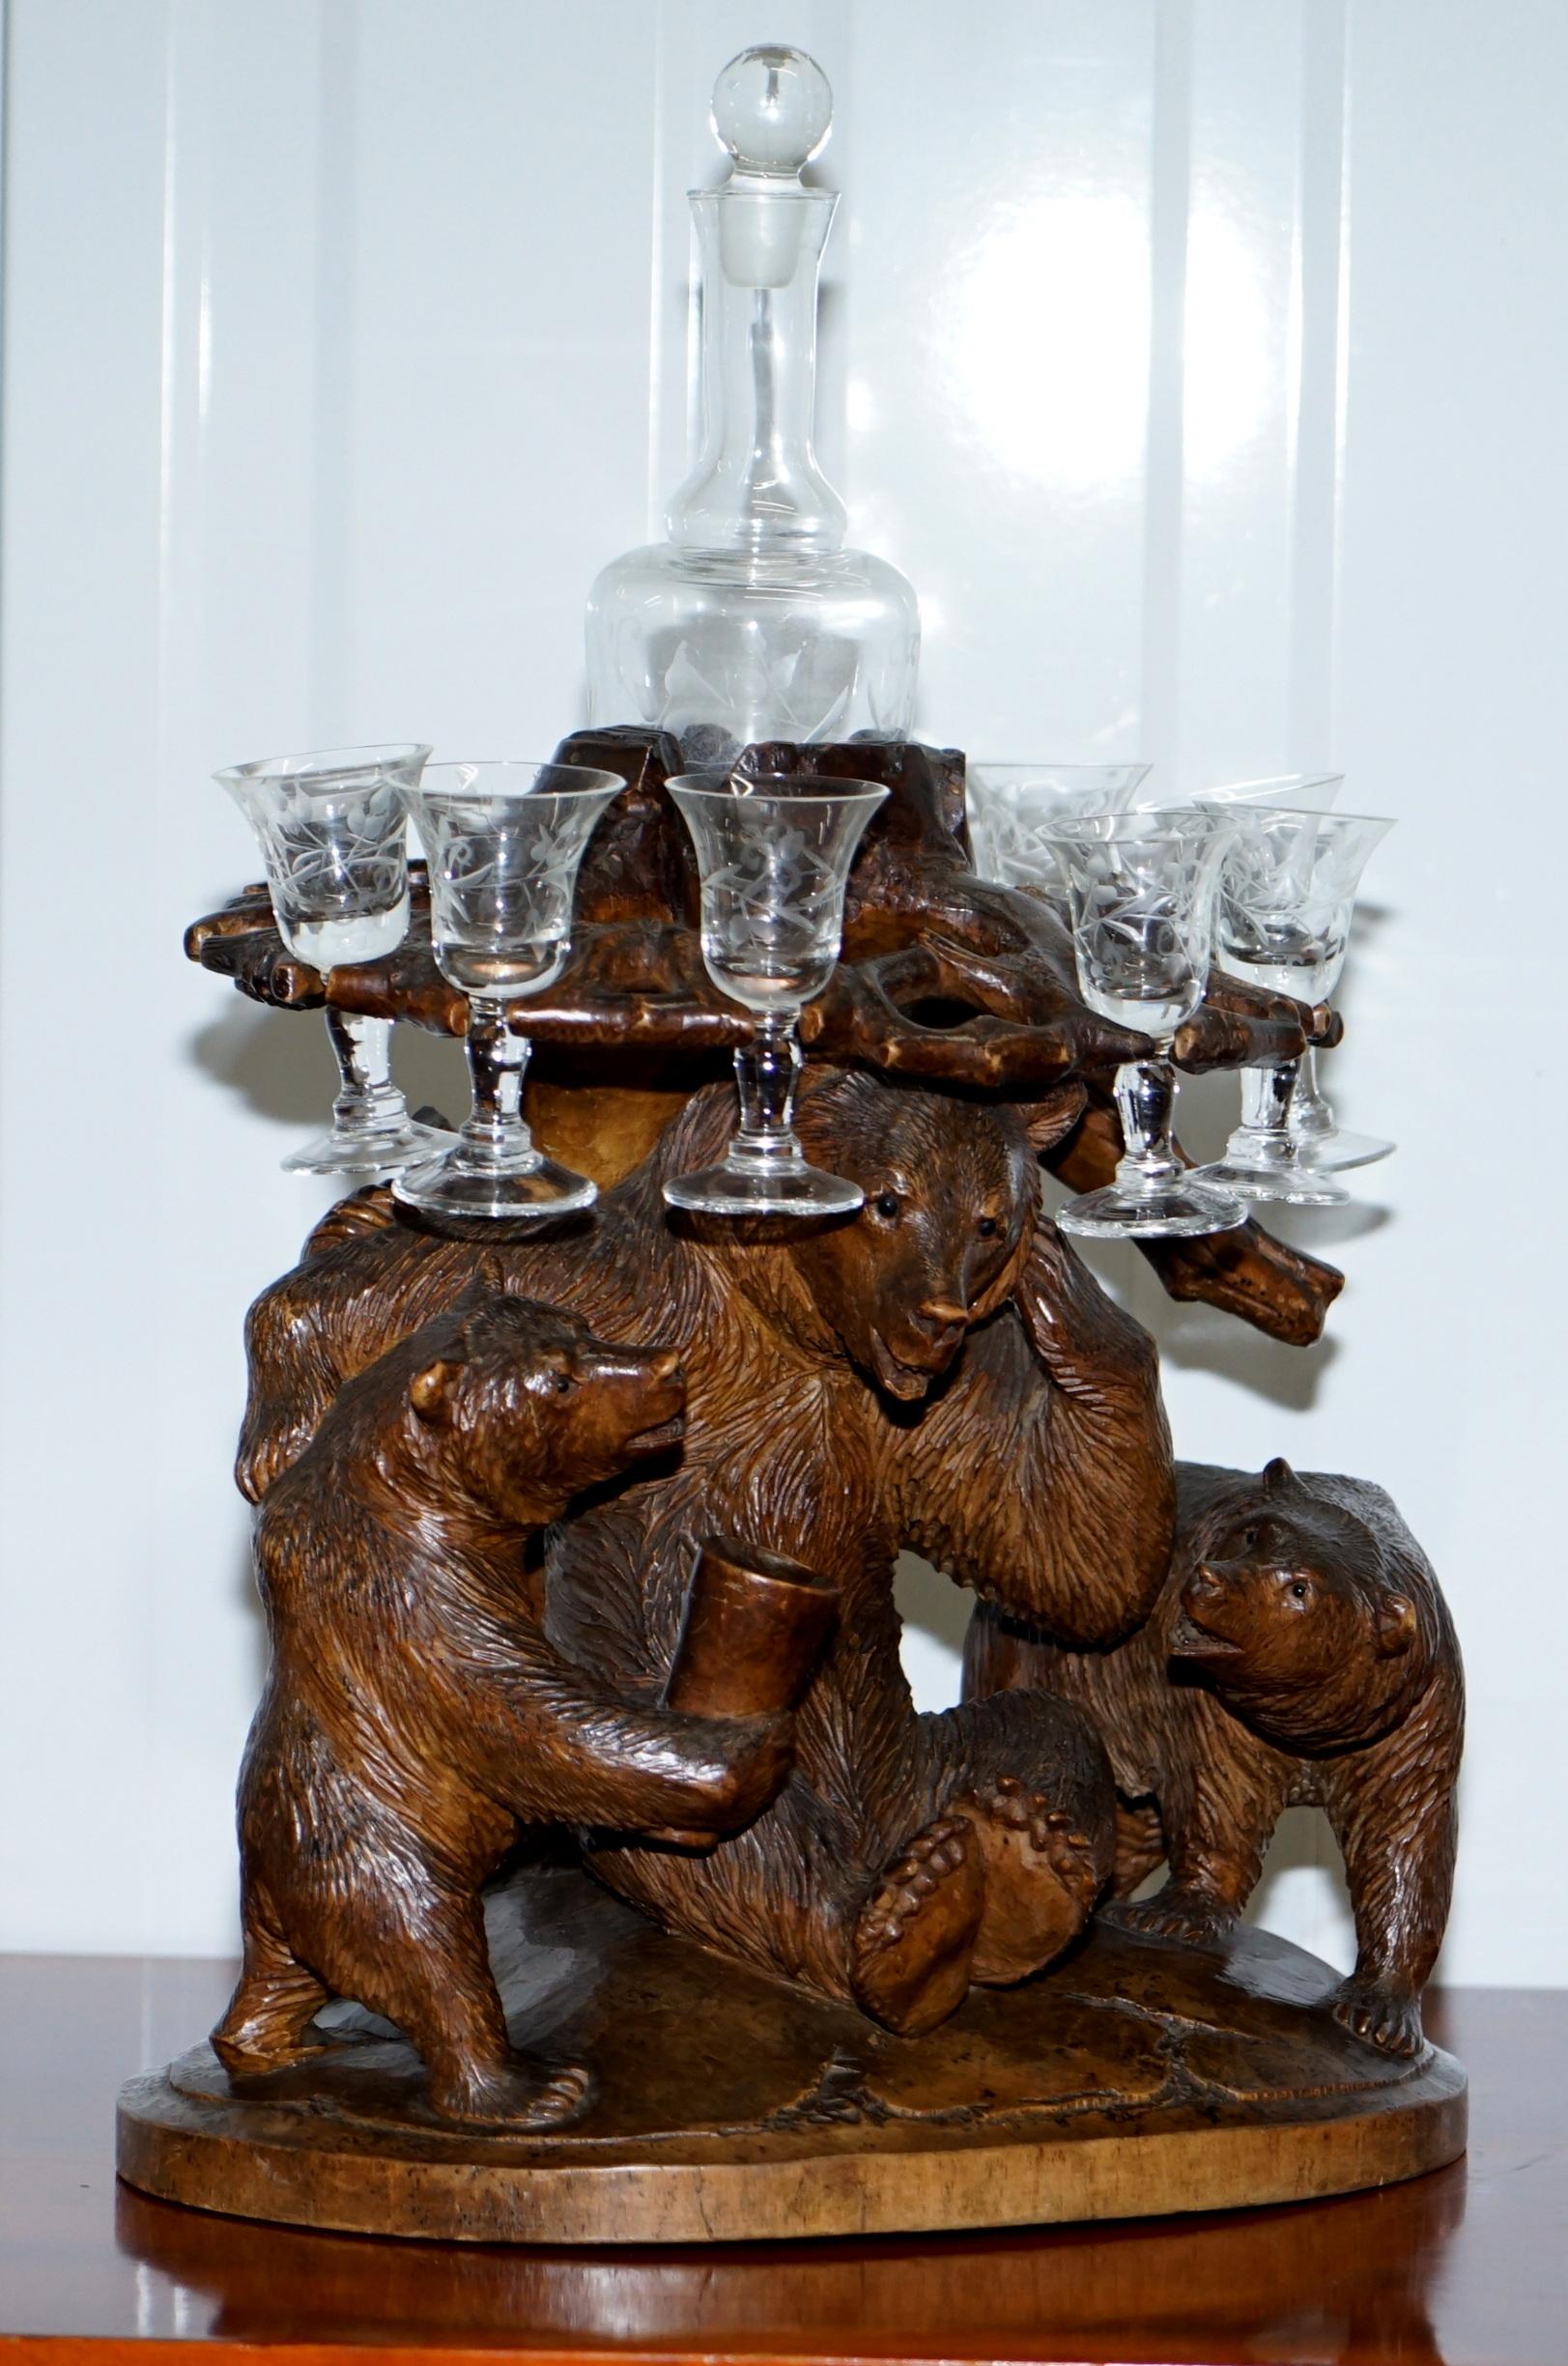 We are delighted to offer for sale this very rare circa 1900 Black Forest wood Tantalus table drinks decanter suite with three bears

This tantalus table, a receptacle for holding a decanter, is a folly of a piece. The base is decorated with three